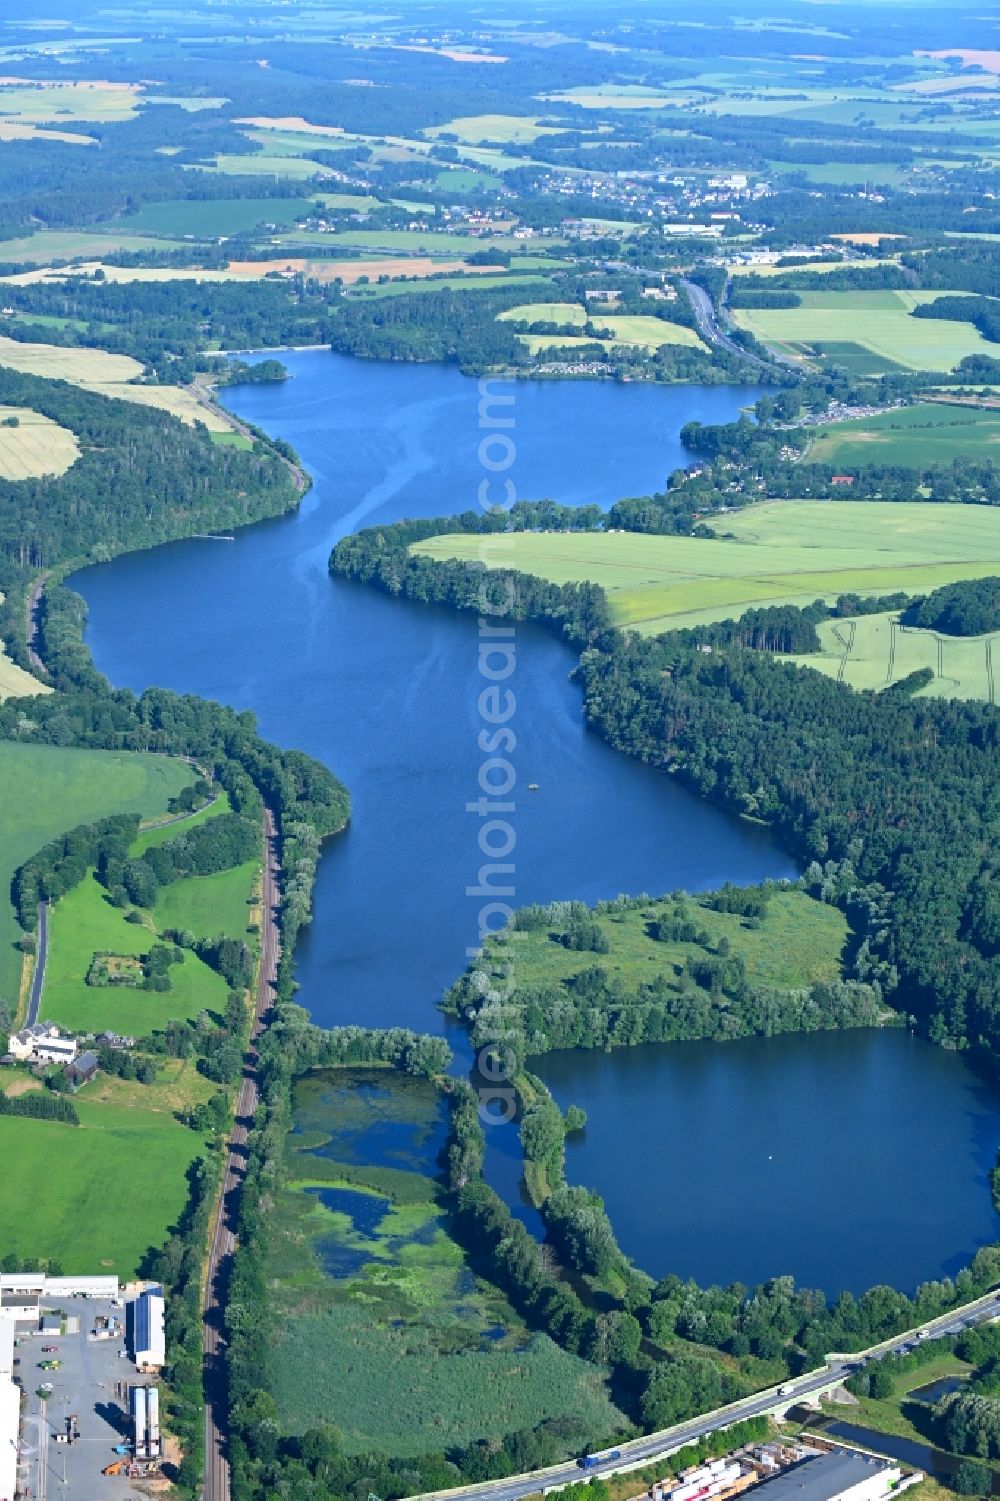 Aerial image Oelsnitz/Vogtl. - Impoundment and shore areas at the lake Weisse Elster - Vorsperre Dobeneck in Oelsnitz/Vogtl. in the state Saxony, Germany